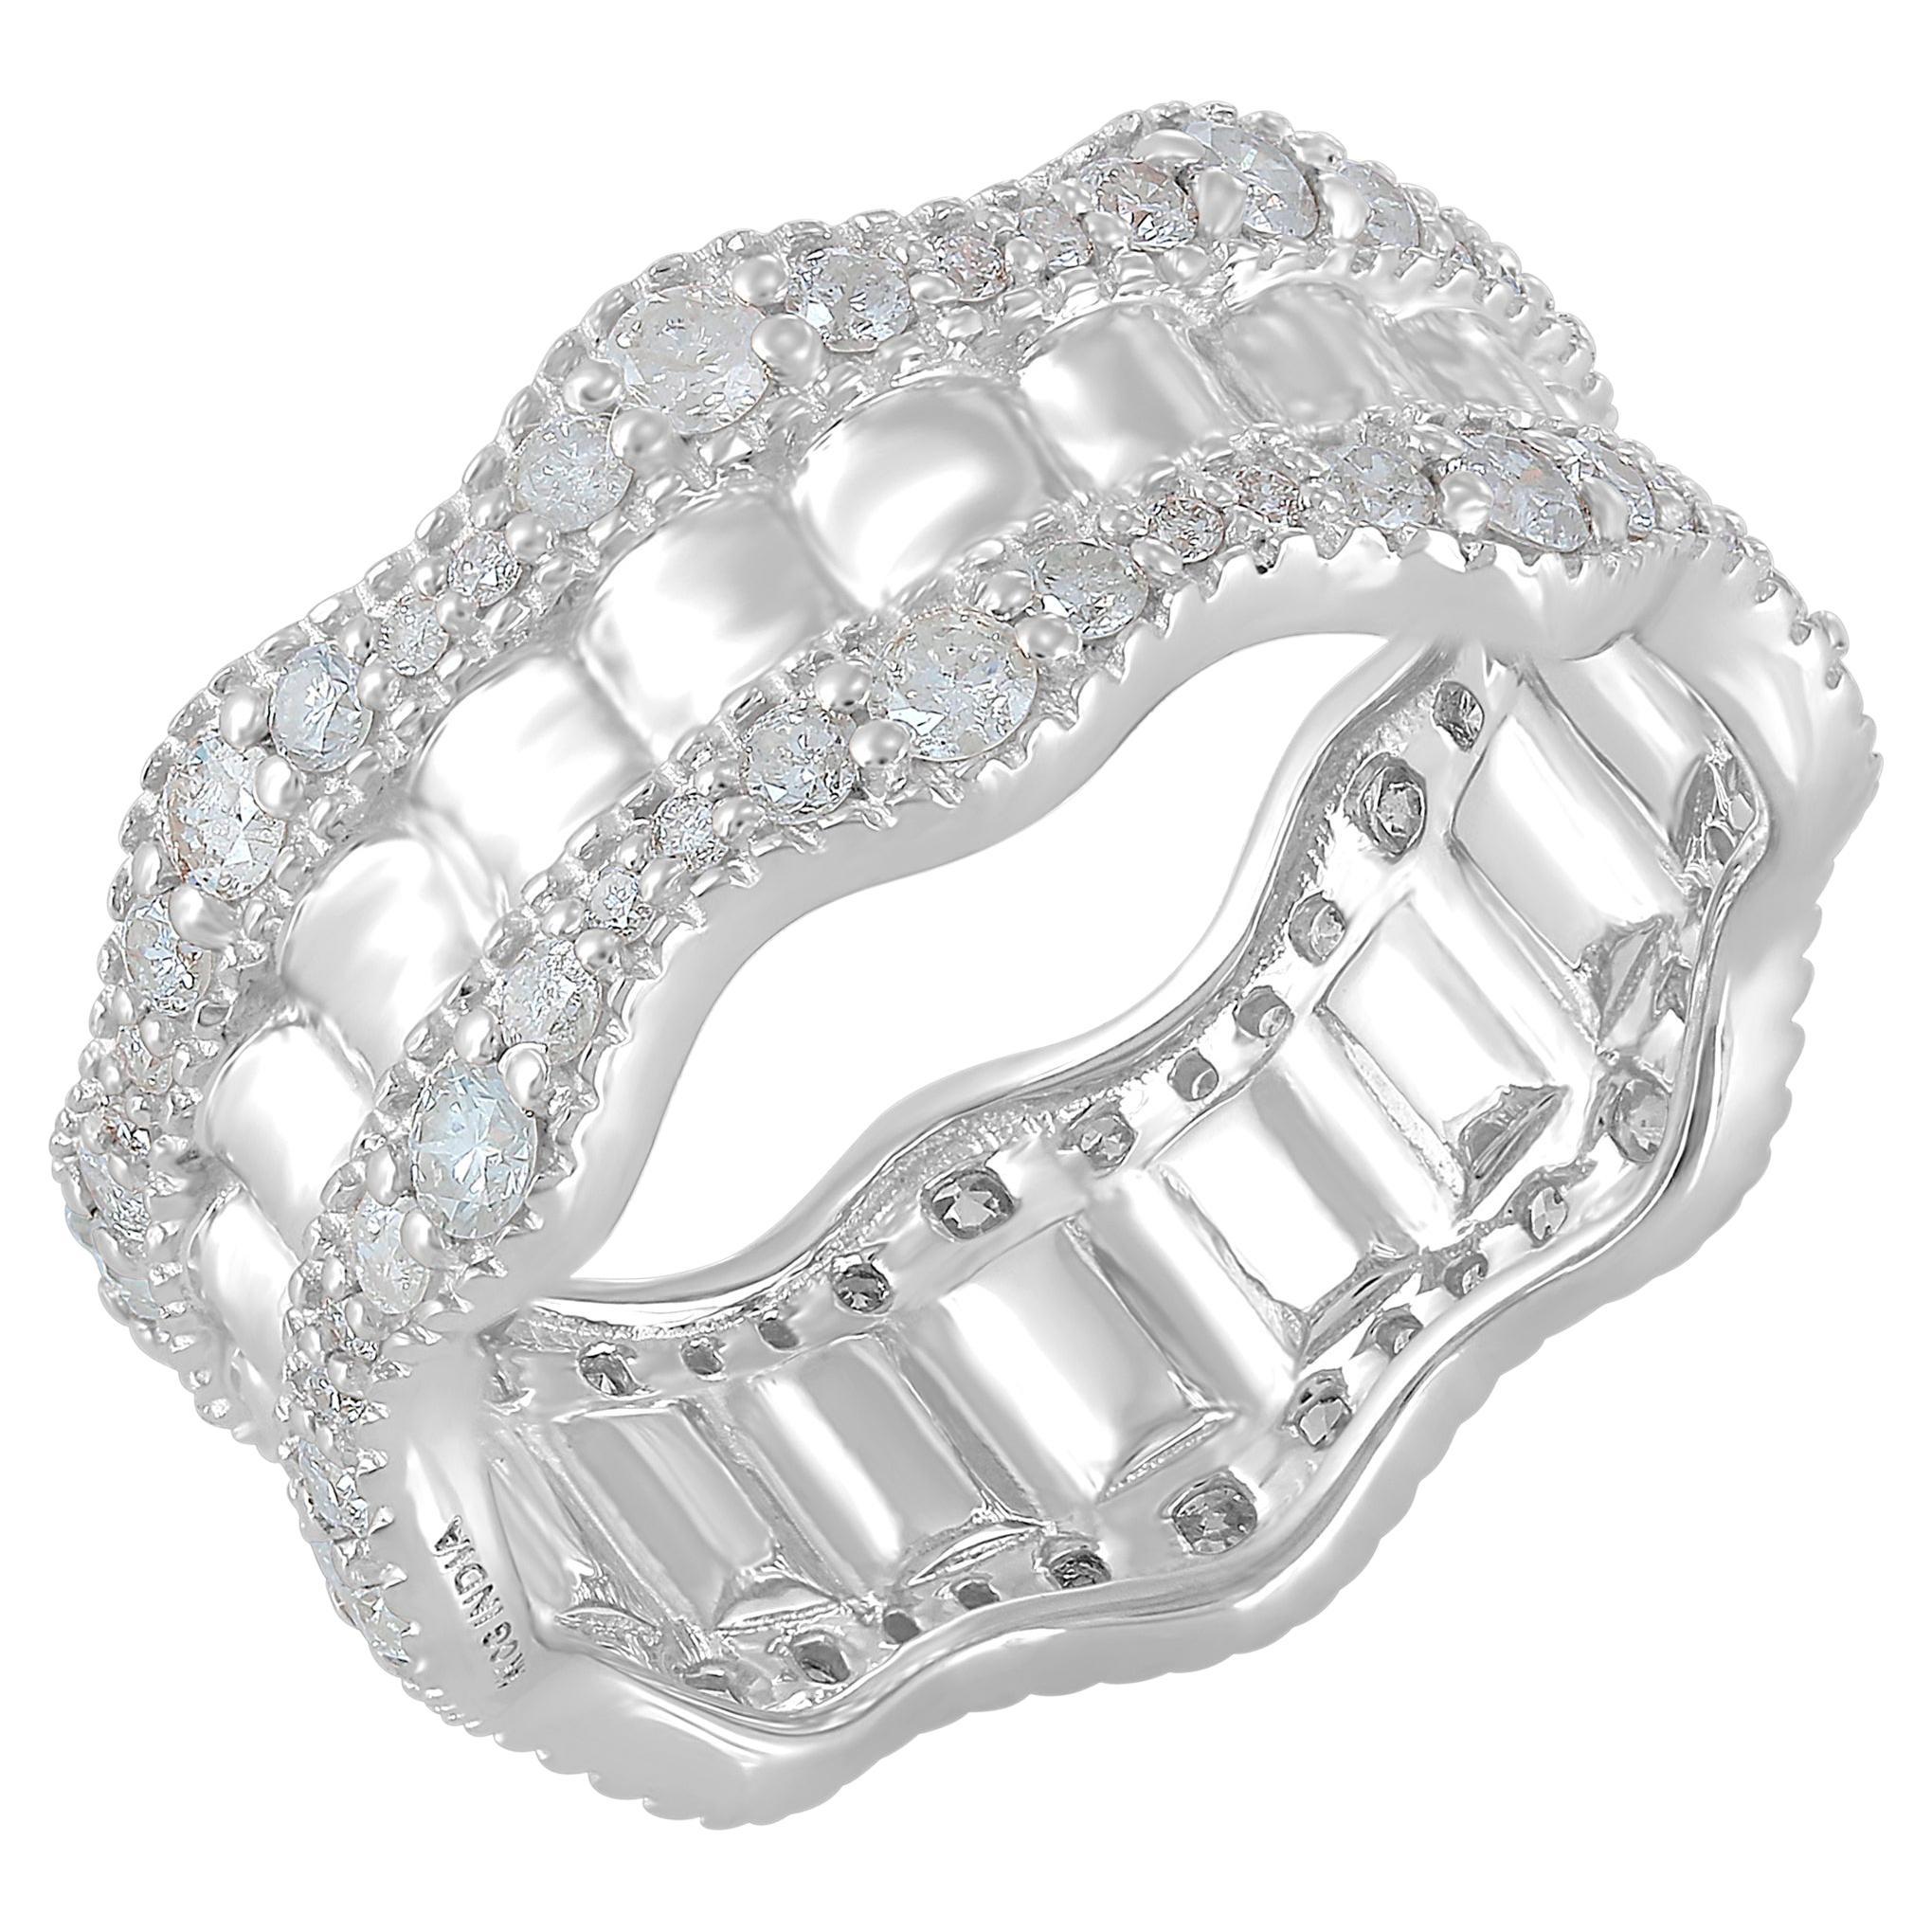 Gemisty 1.22cttw. Diamond Eternity Band Ring in 925 Sterling Silver